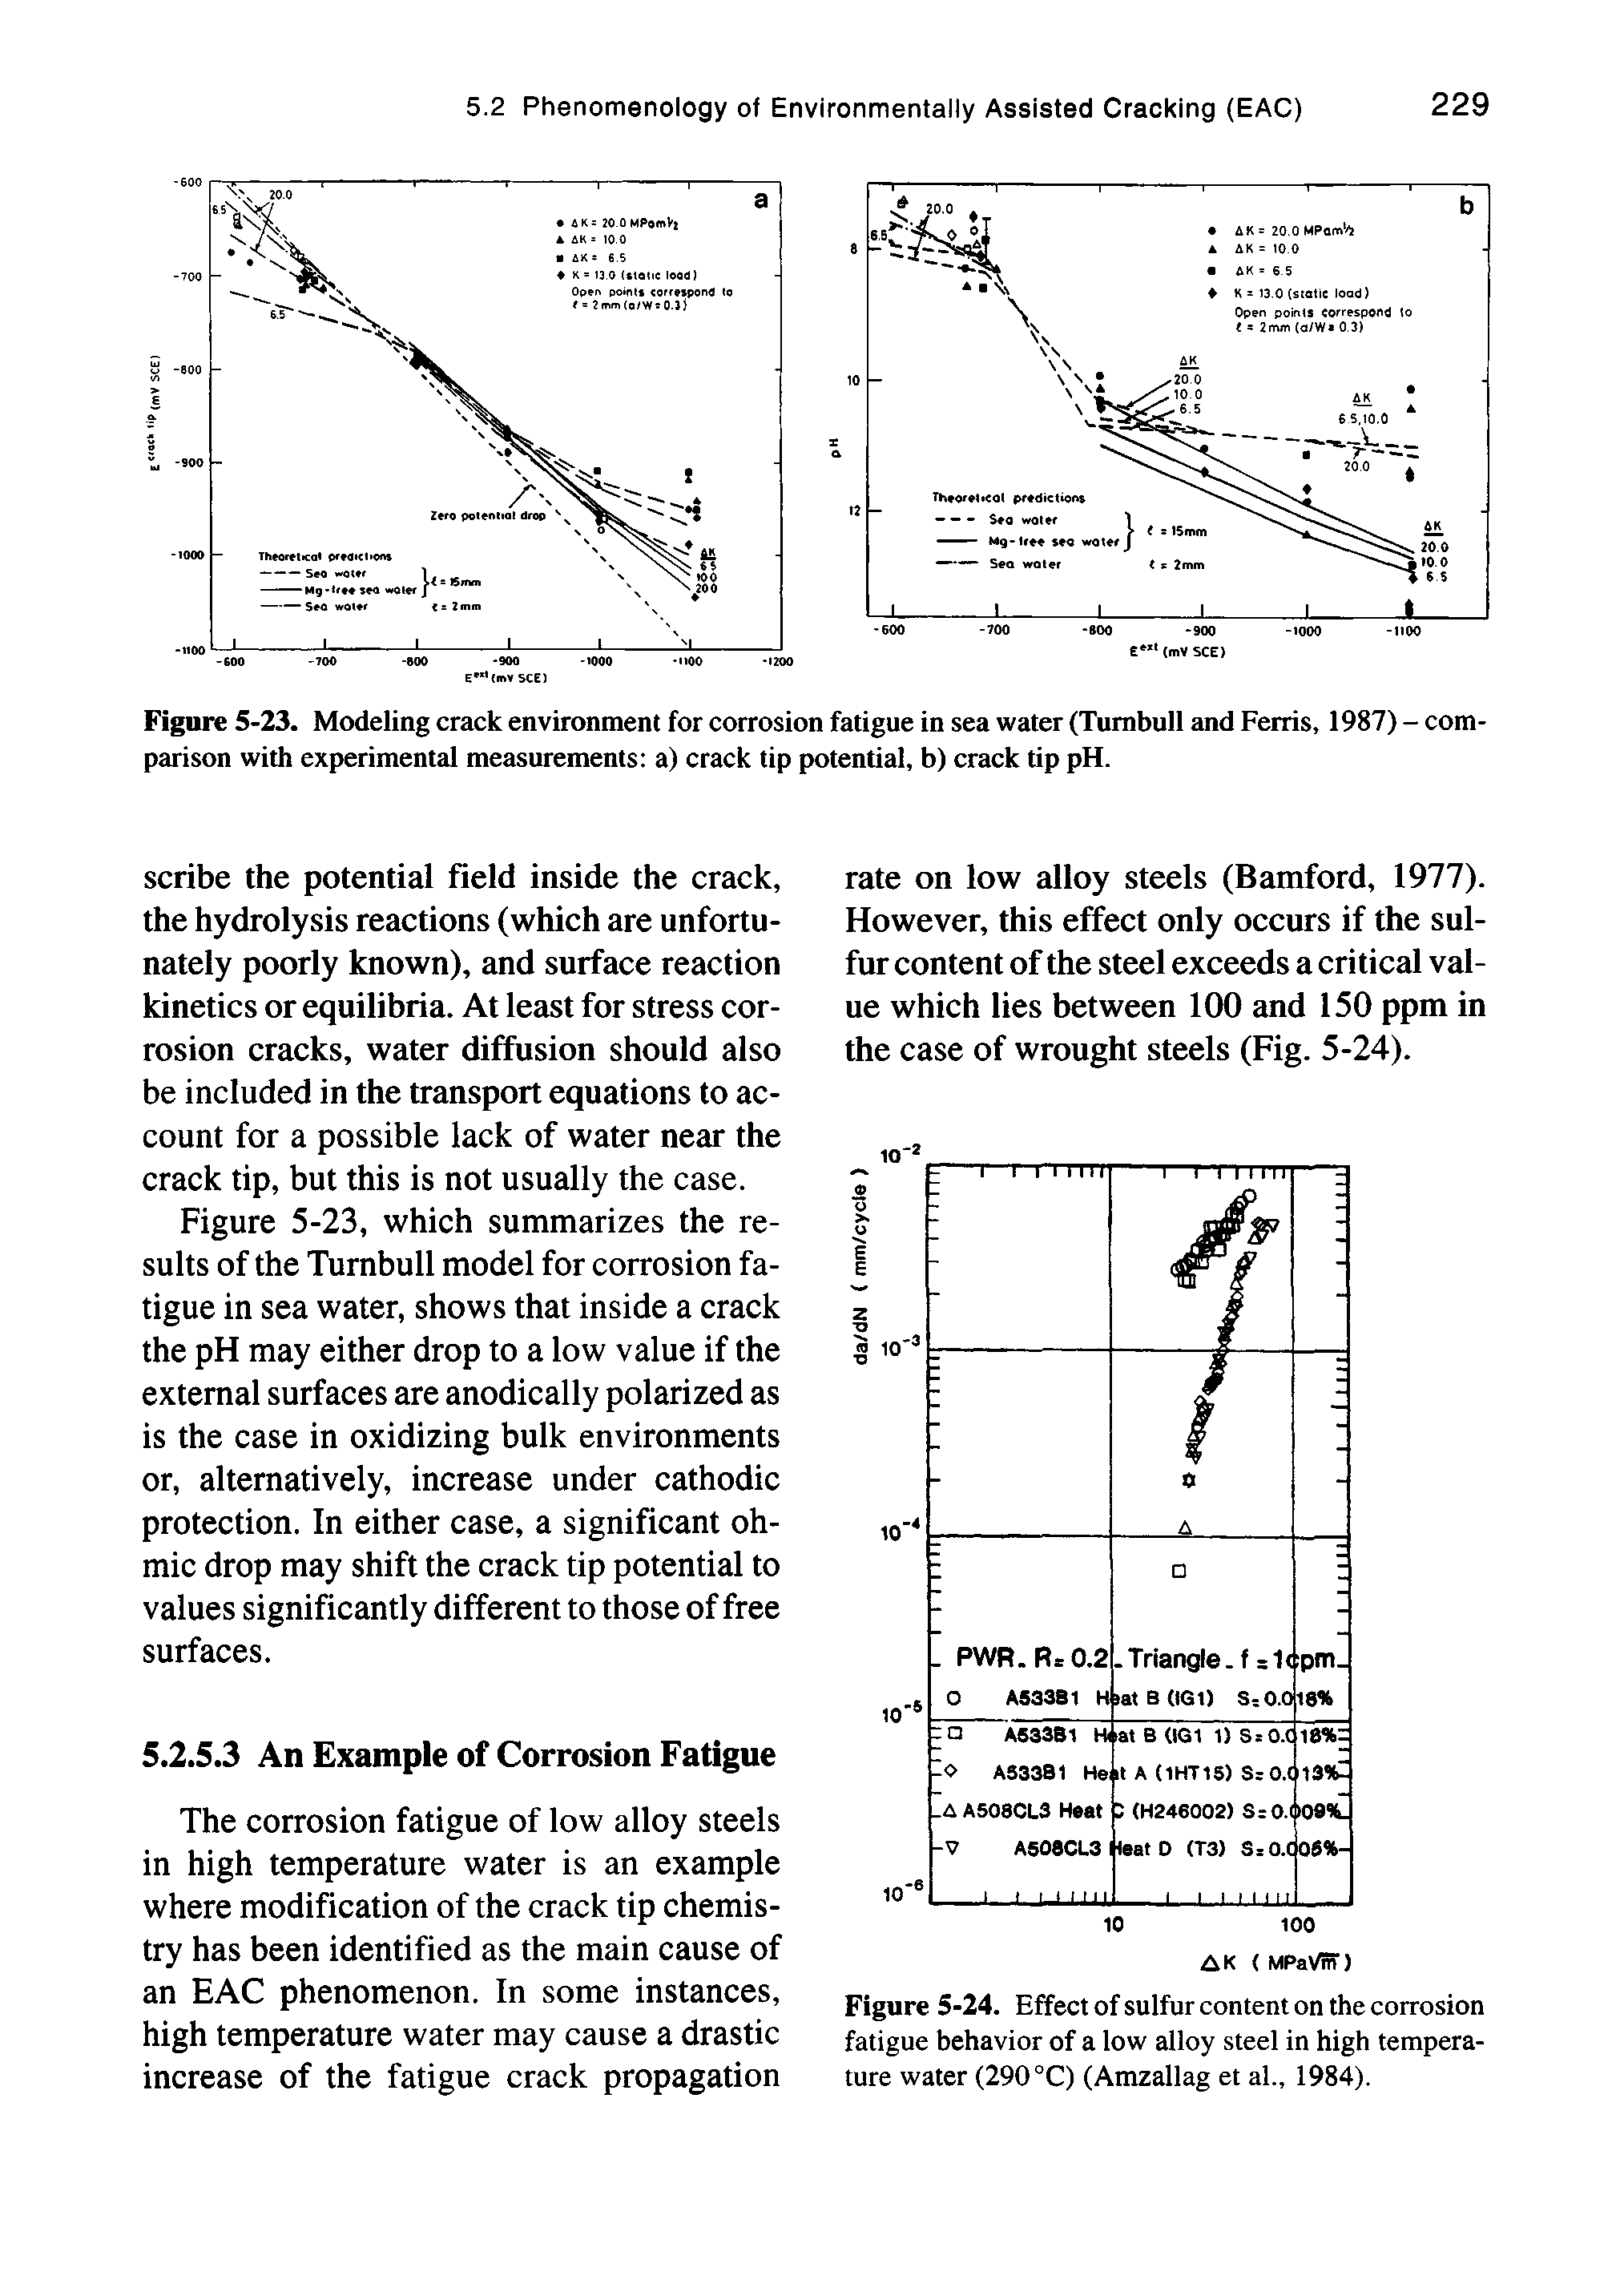 Figure 5-23. Modeling crack environment for corrosion fatigue in sea water (Turnbull and Ferris, 1987) - comparison with experimental measurements a) crack tip potential, b) crack tip pH.